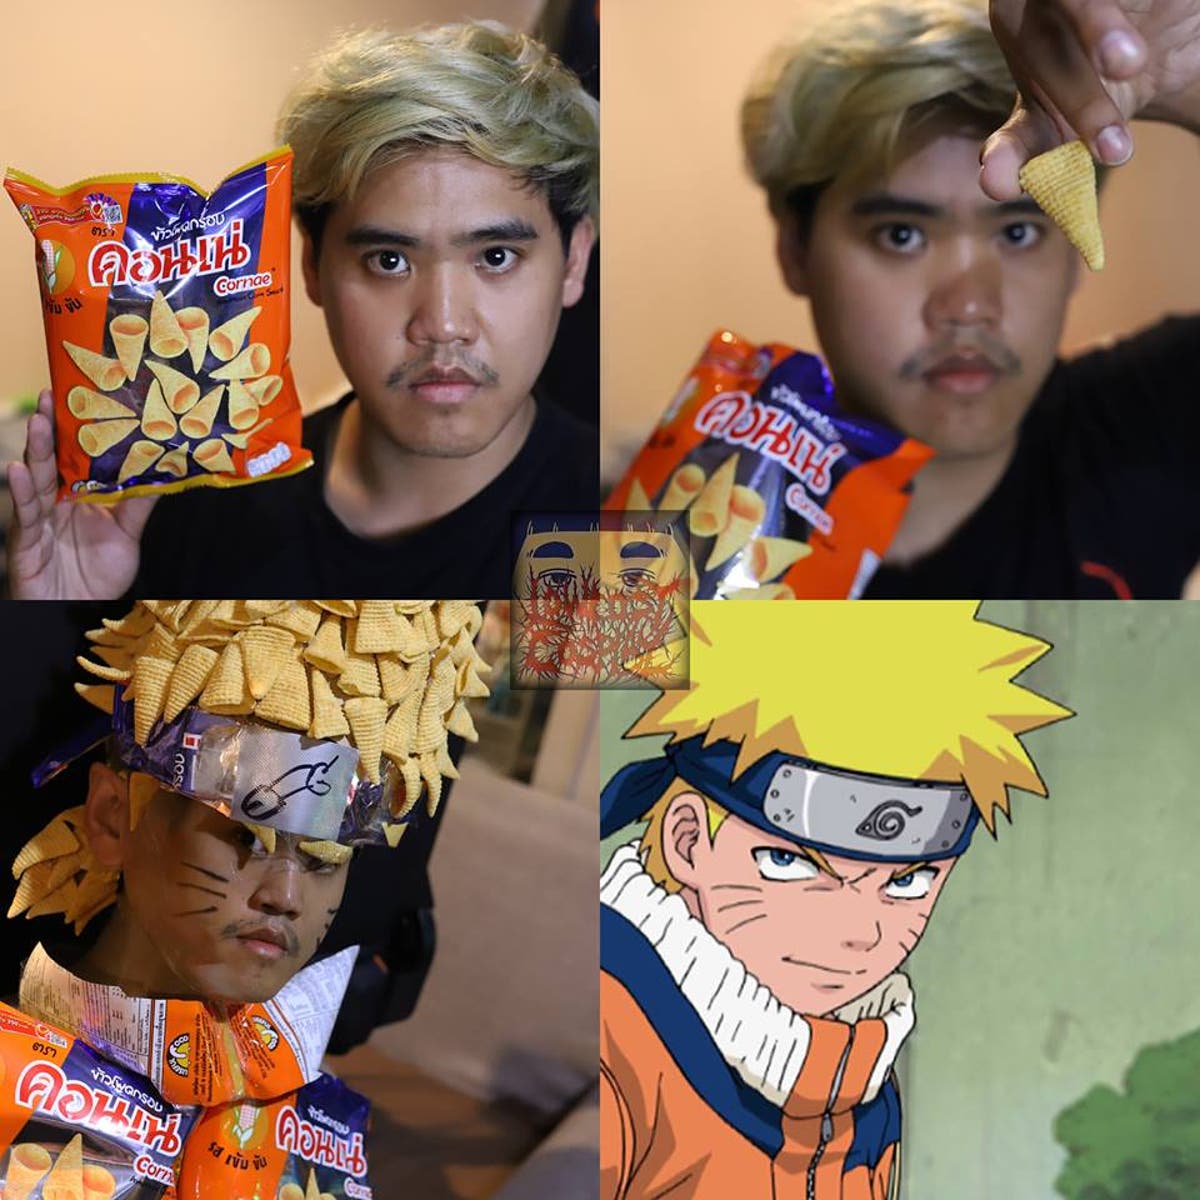 Low Cost Cosplay Guy Makes Hilarious Naruto Cosplays | Cosplay Central